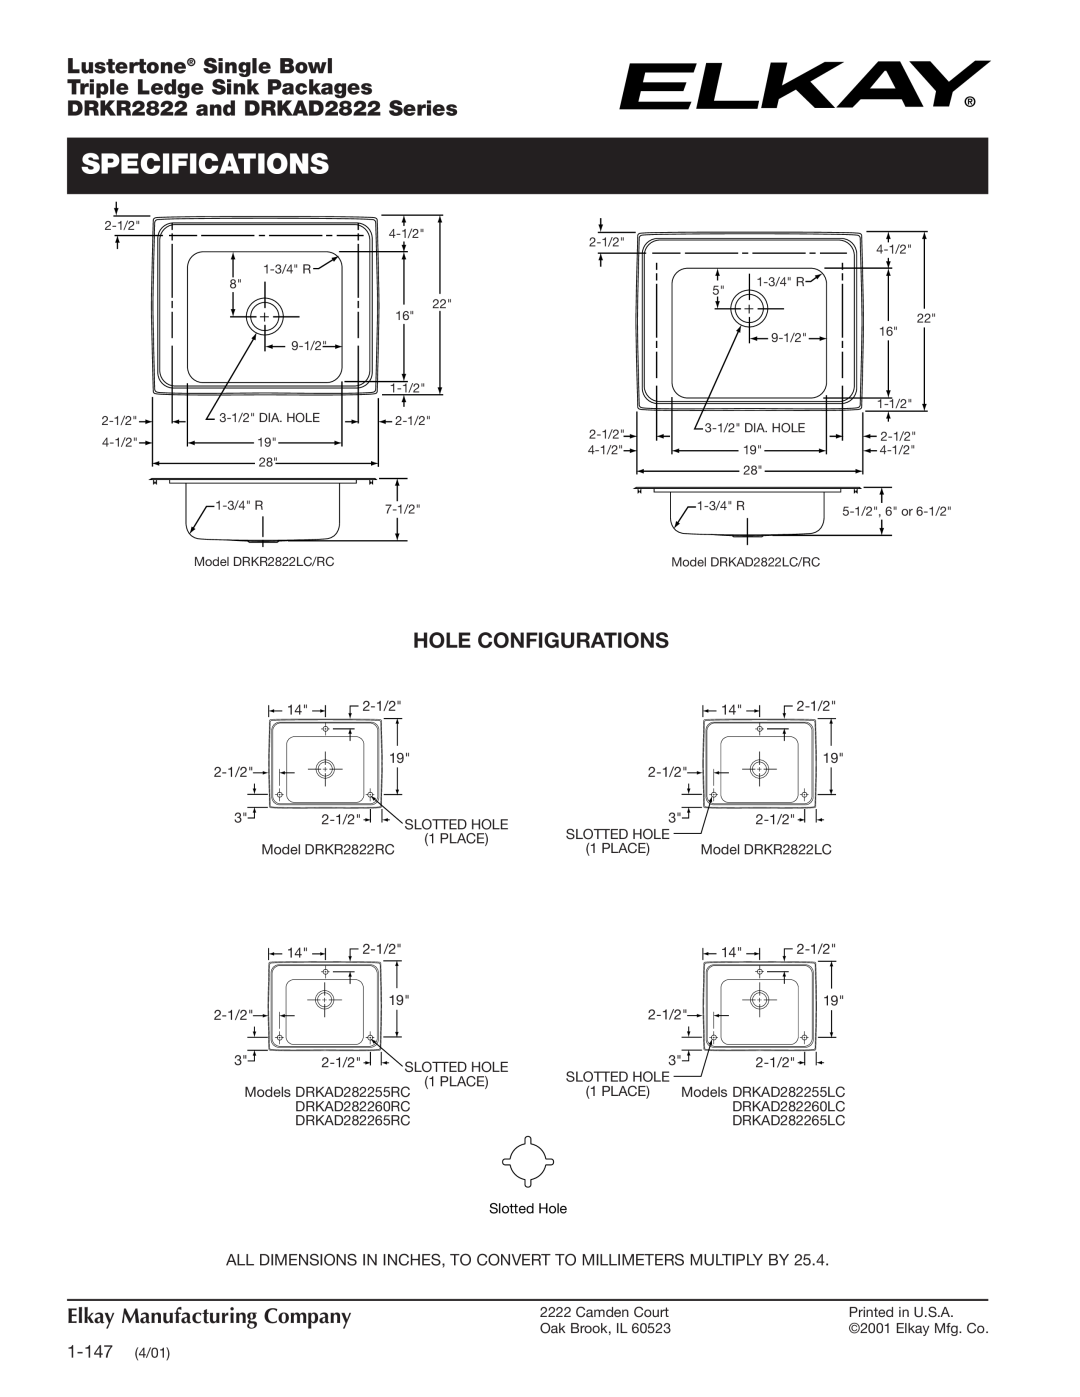 Elkay DRKR2822 Hole Configurations, 1-147 4/01, Specifications, Lustertone Single Bowl Triple Ledge Sink Packages 